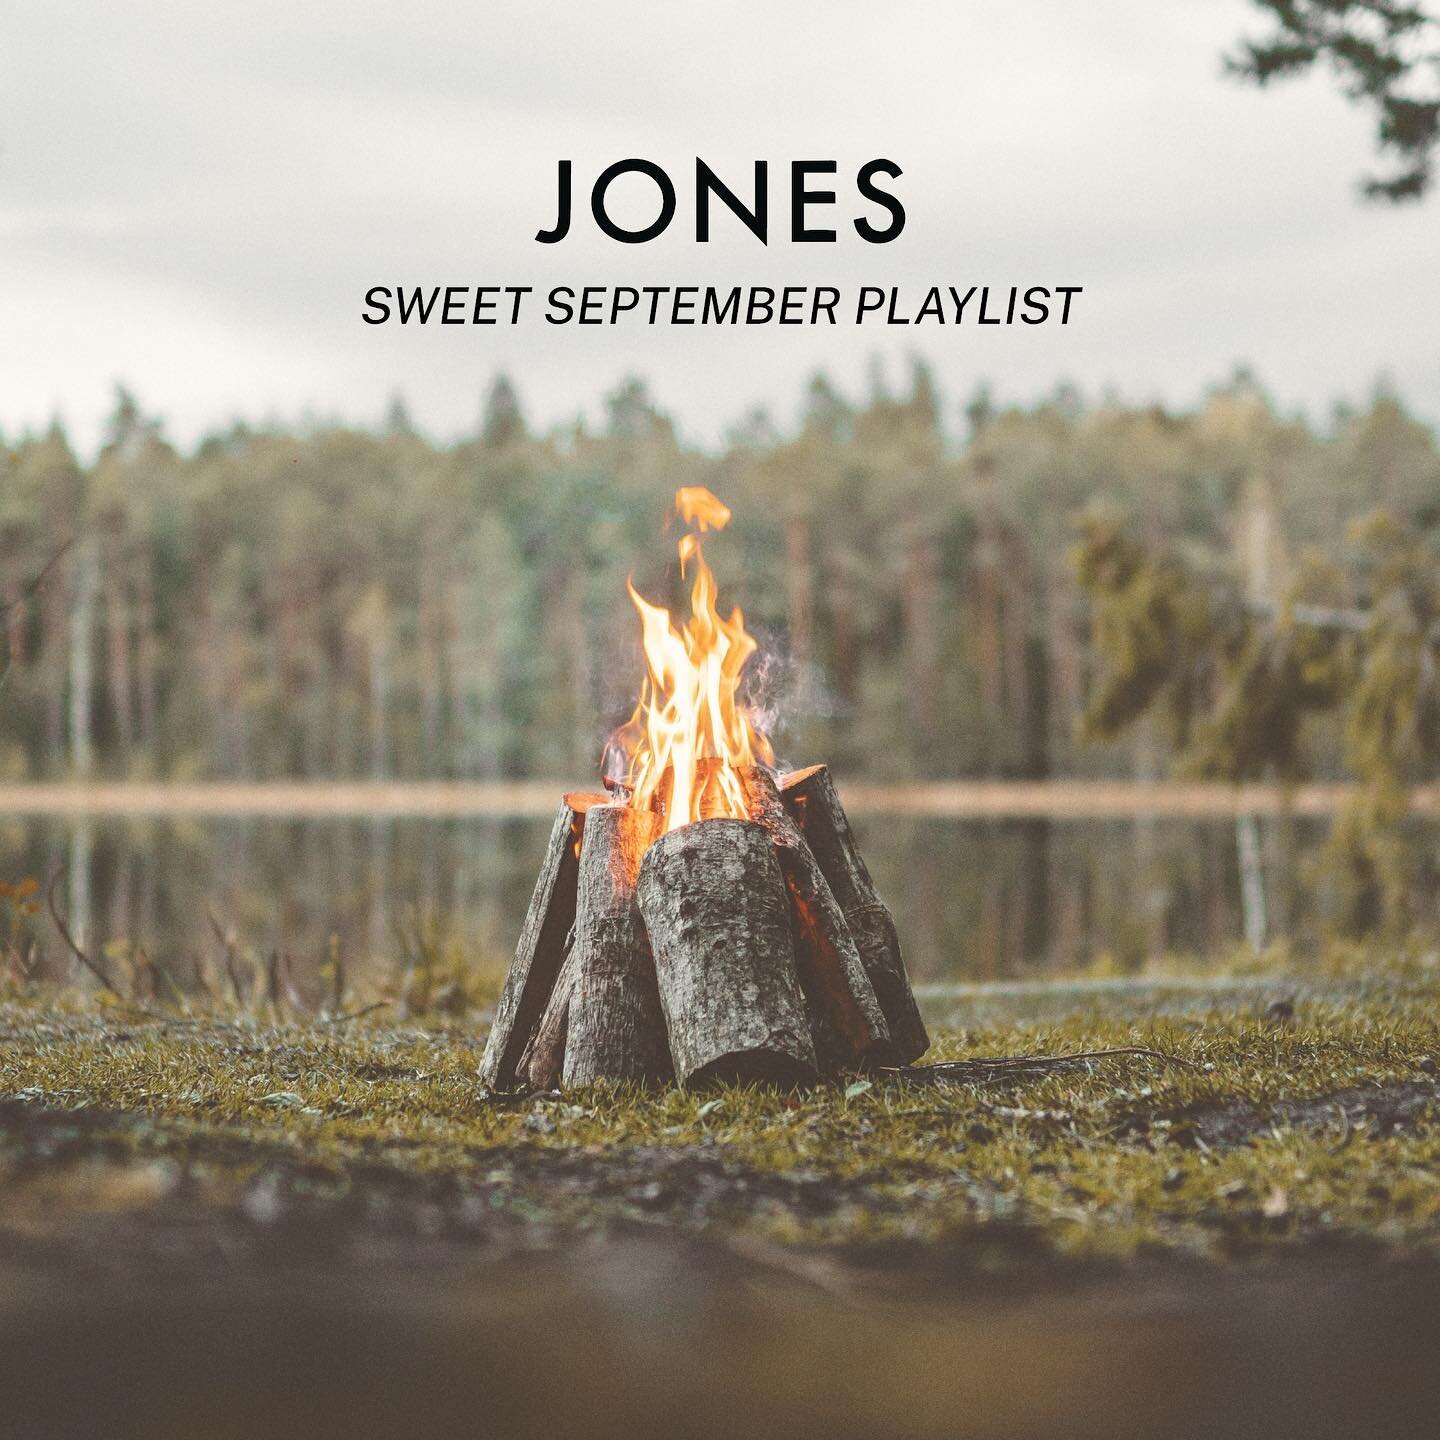 As the summer comes to a close, make the most of the last long weekend with our Sweet September playlist. Whether you're spending time with friends or enjoying some alone time, let our playlist help you make the most of this last hurrah of summer!

?